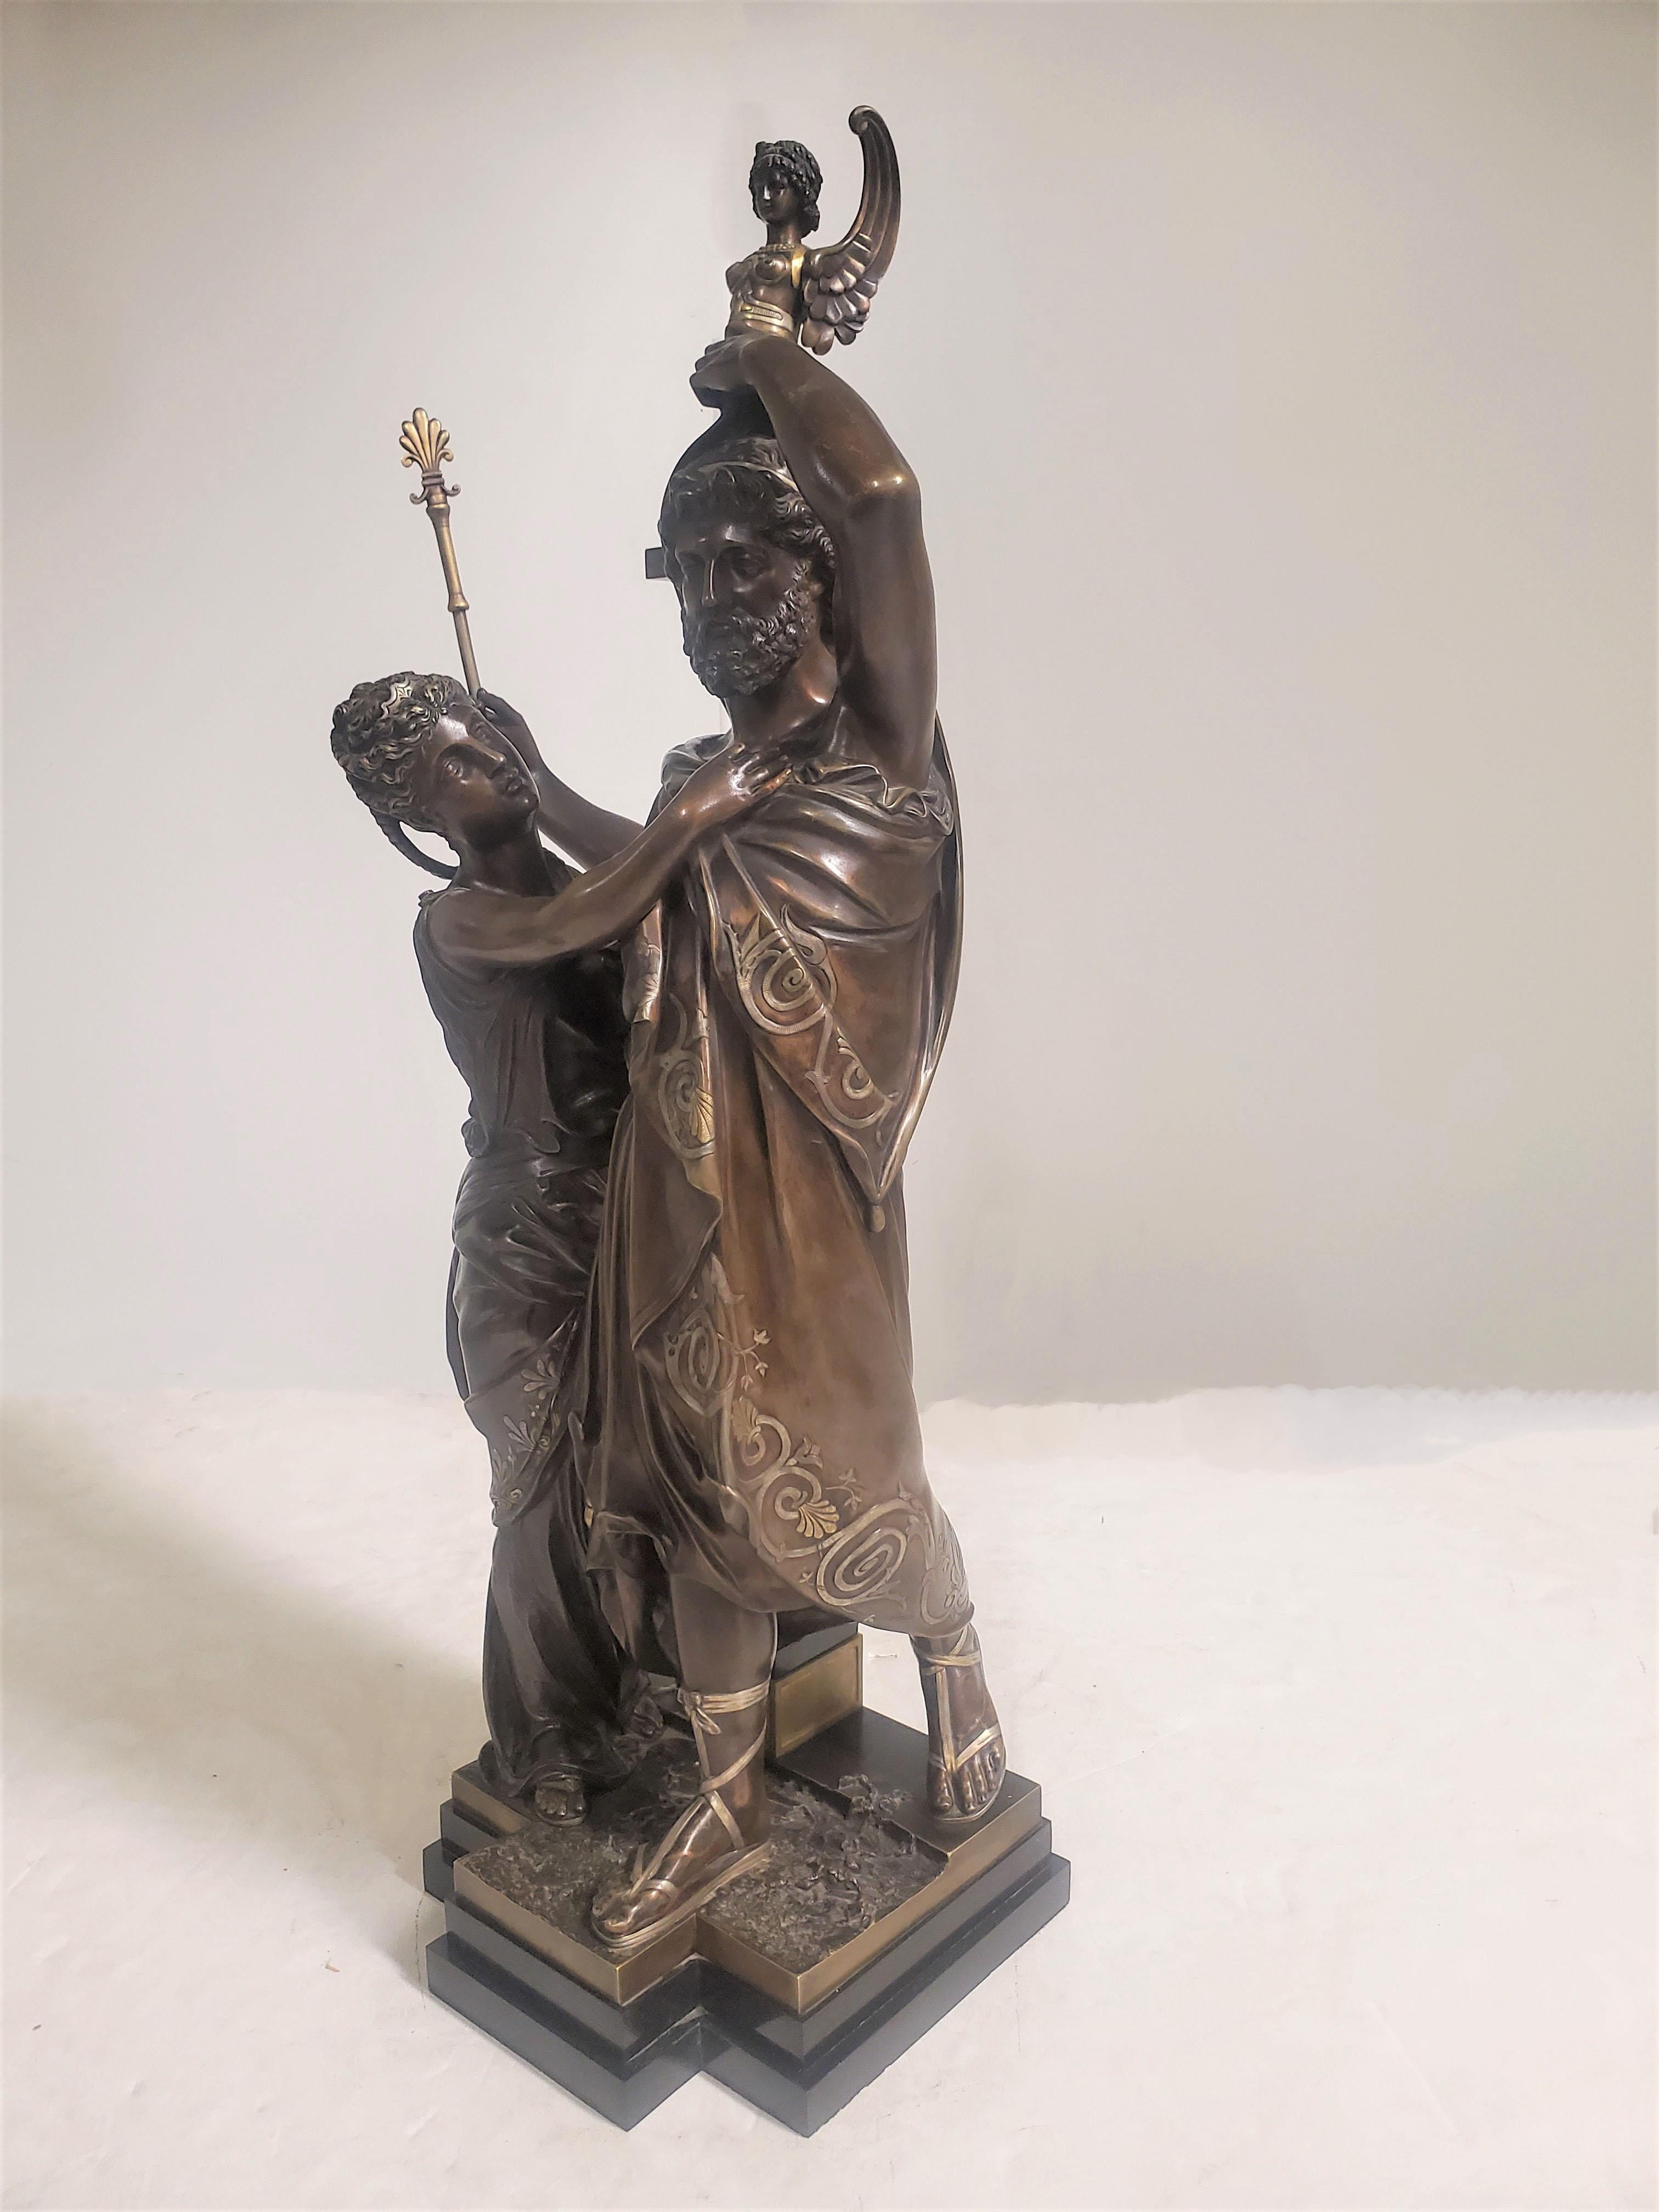 Important French 19th century multi figural bronze sculpture of a male and female, in a warm brown patina with unusual and rare parcel gilt and silver intricate decoration. 
Depicting a King with his Queen or consort by his side and standing near a